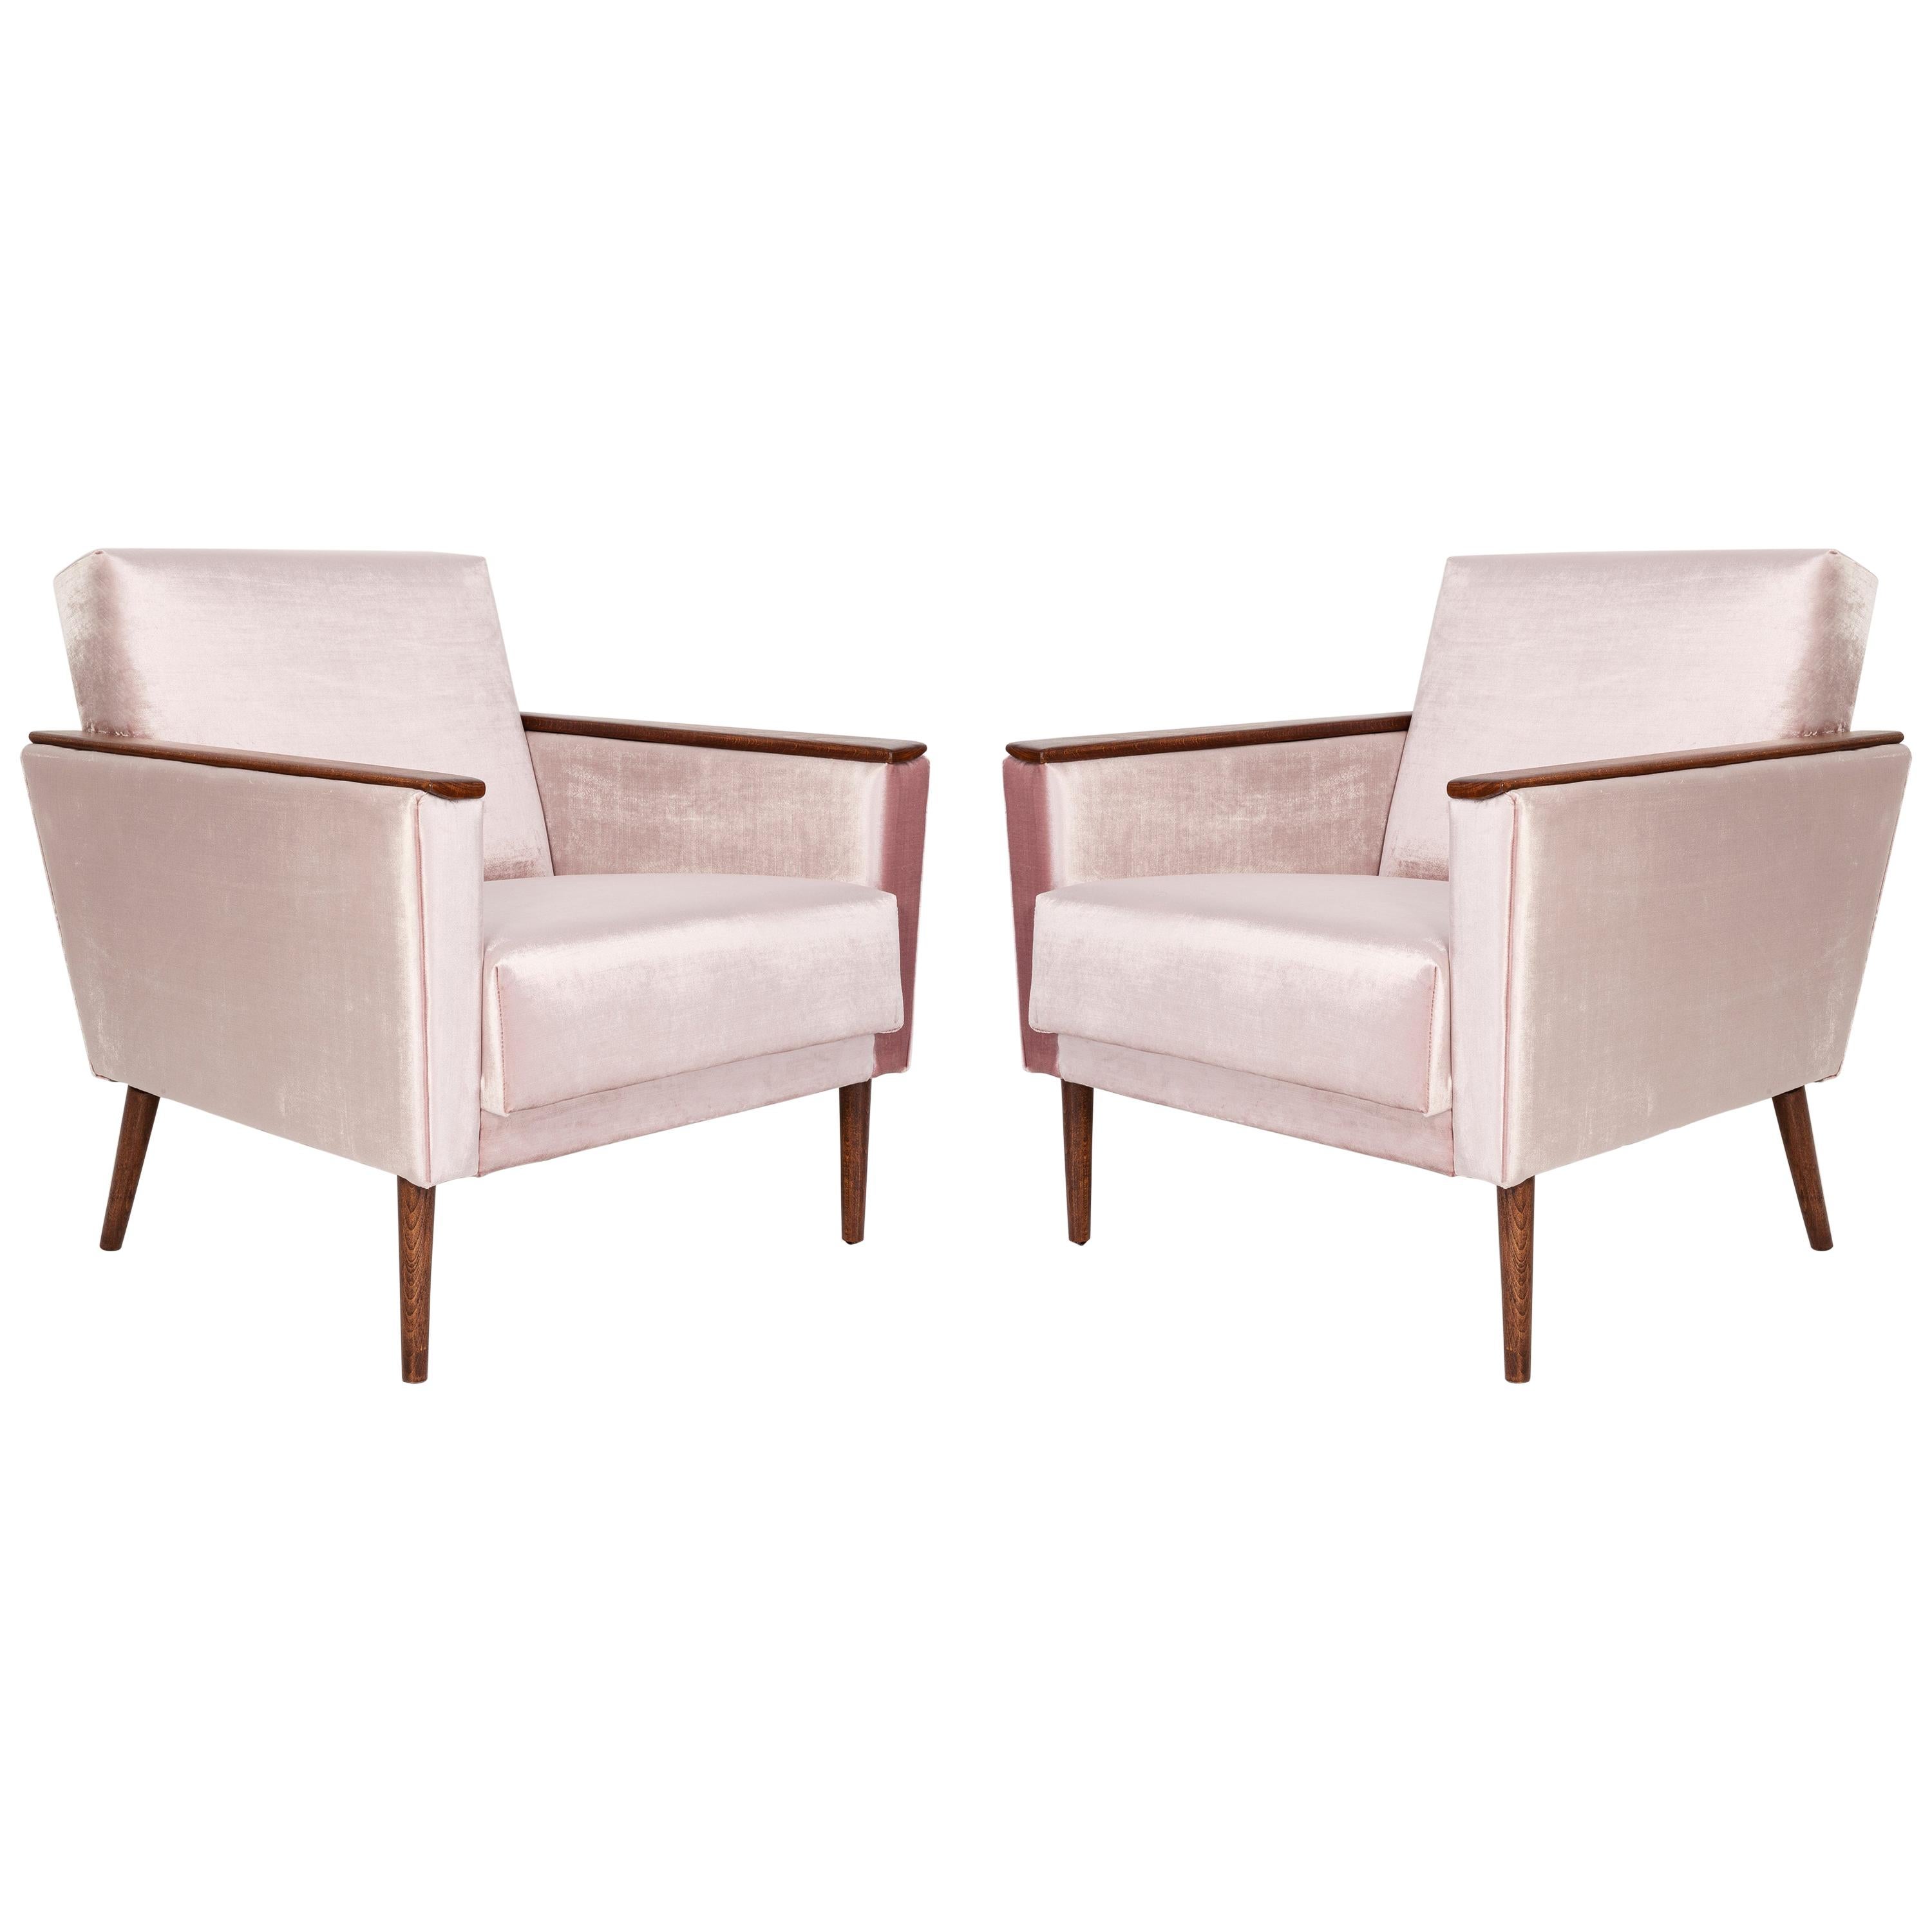 Pair of Midcentury Light Pink Club Armchairs, 1960s, DDR, Germany